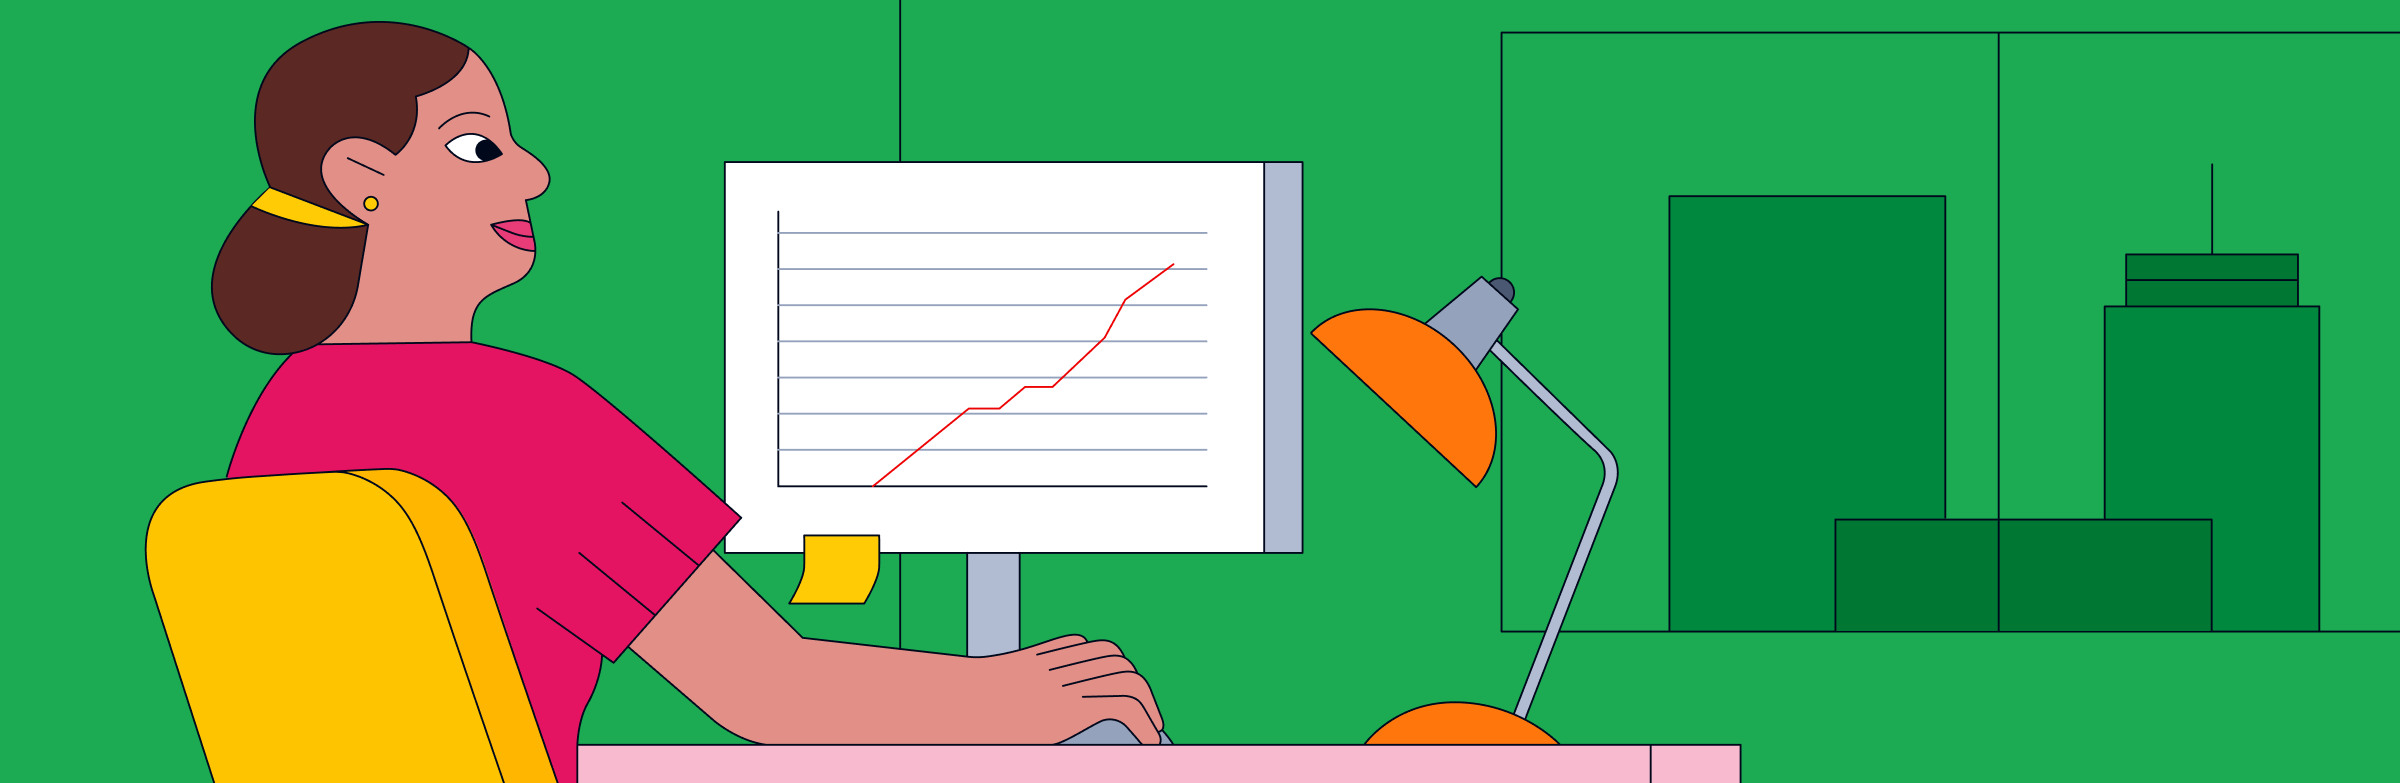 Illustration of a woman working at a desktop computer whose monitor displays a chart depicting an upward trend